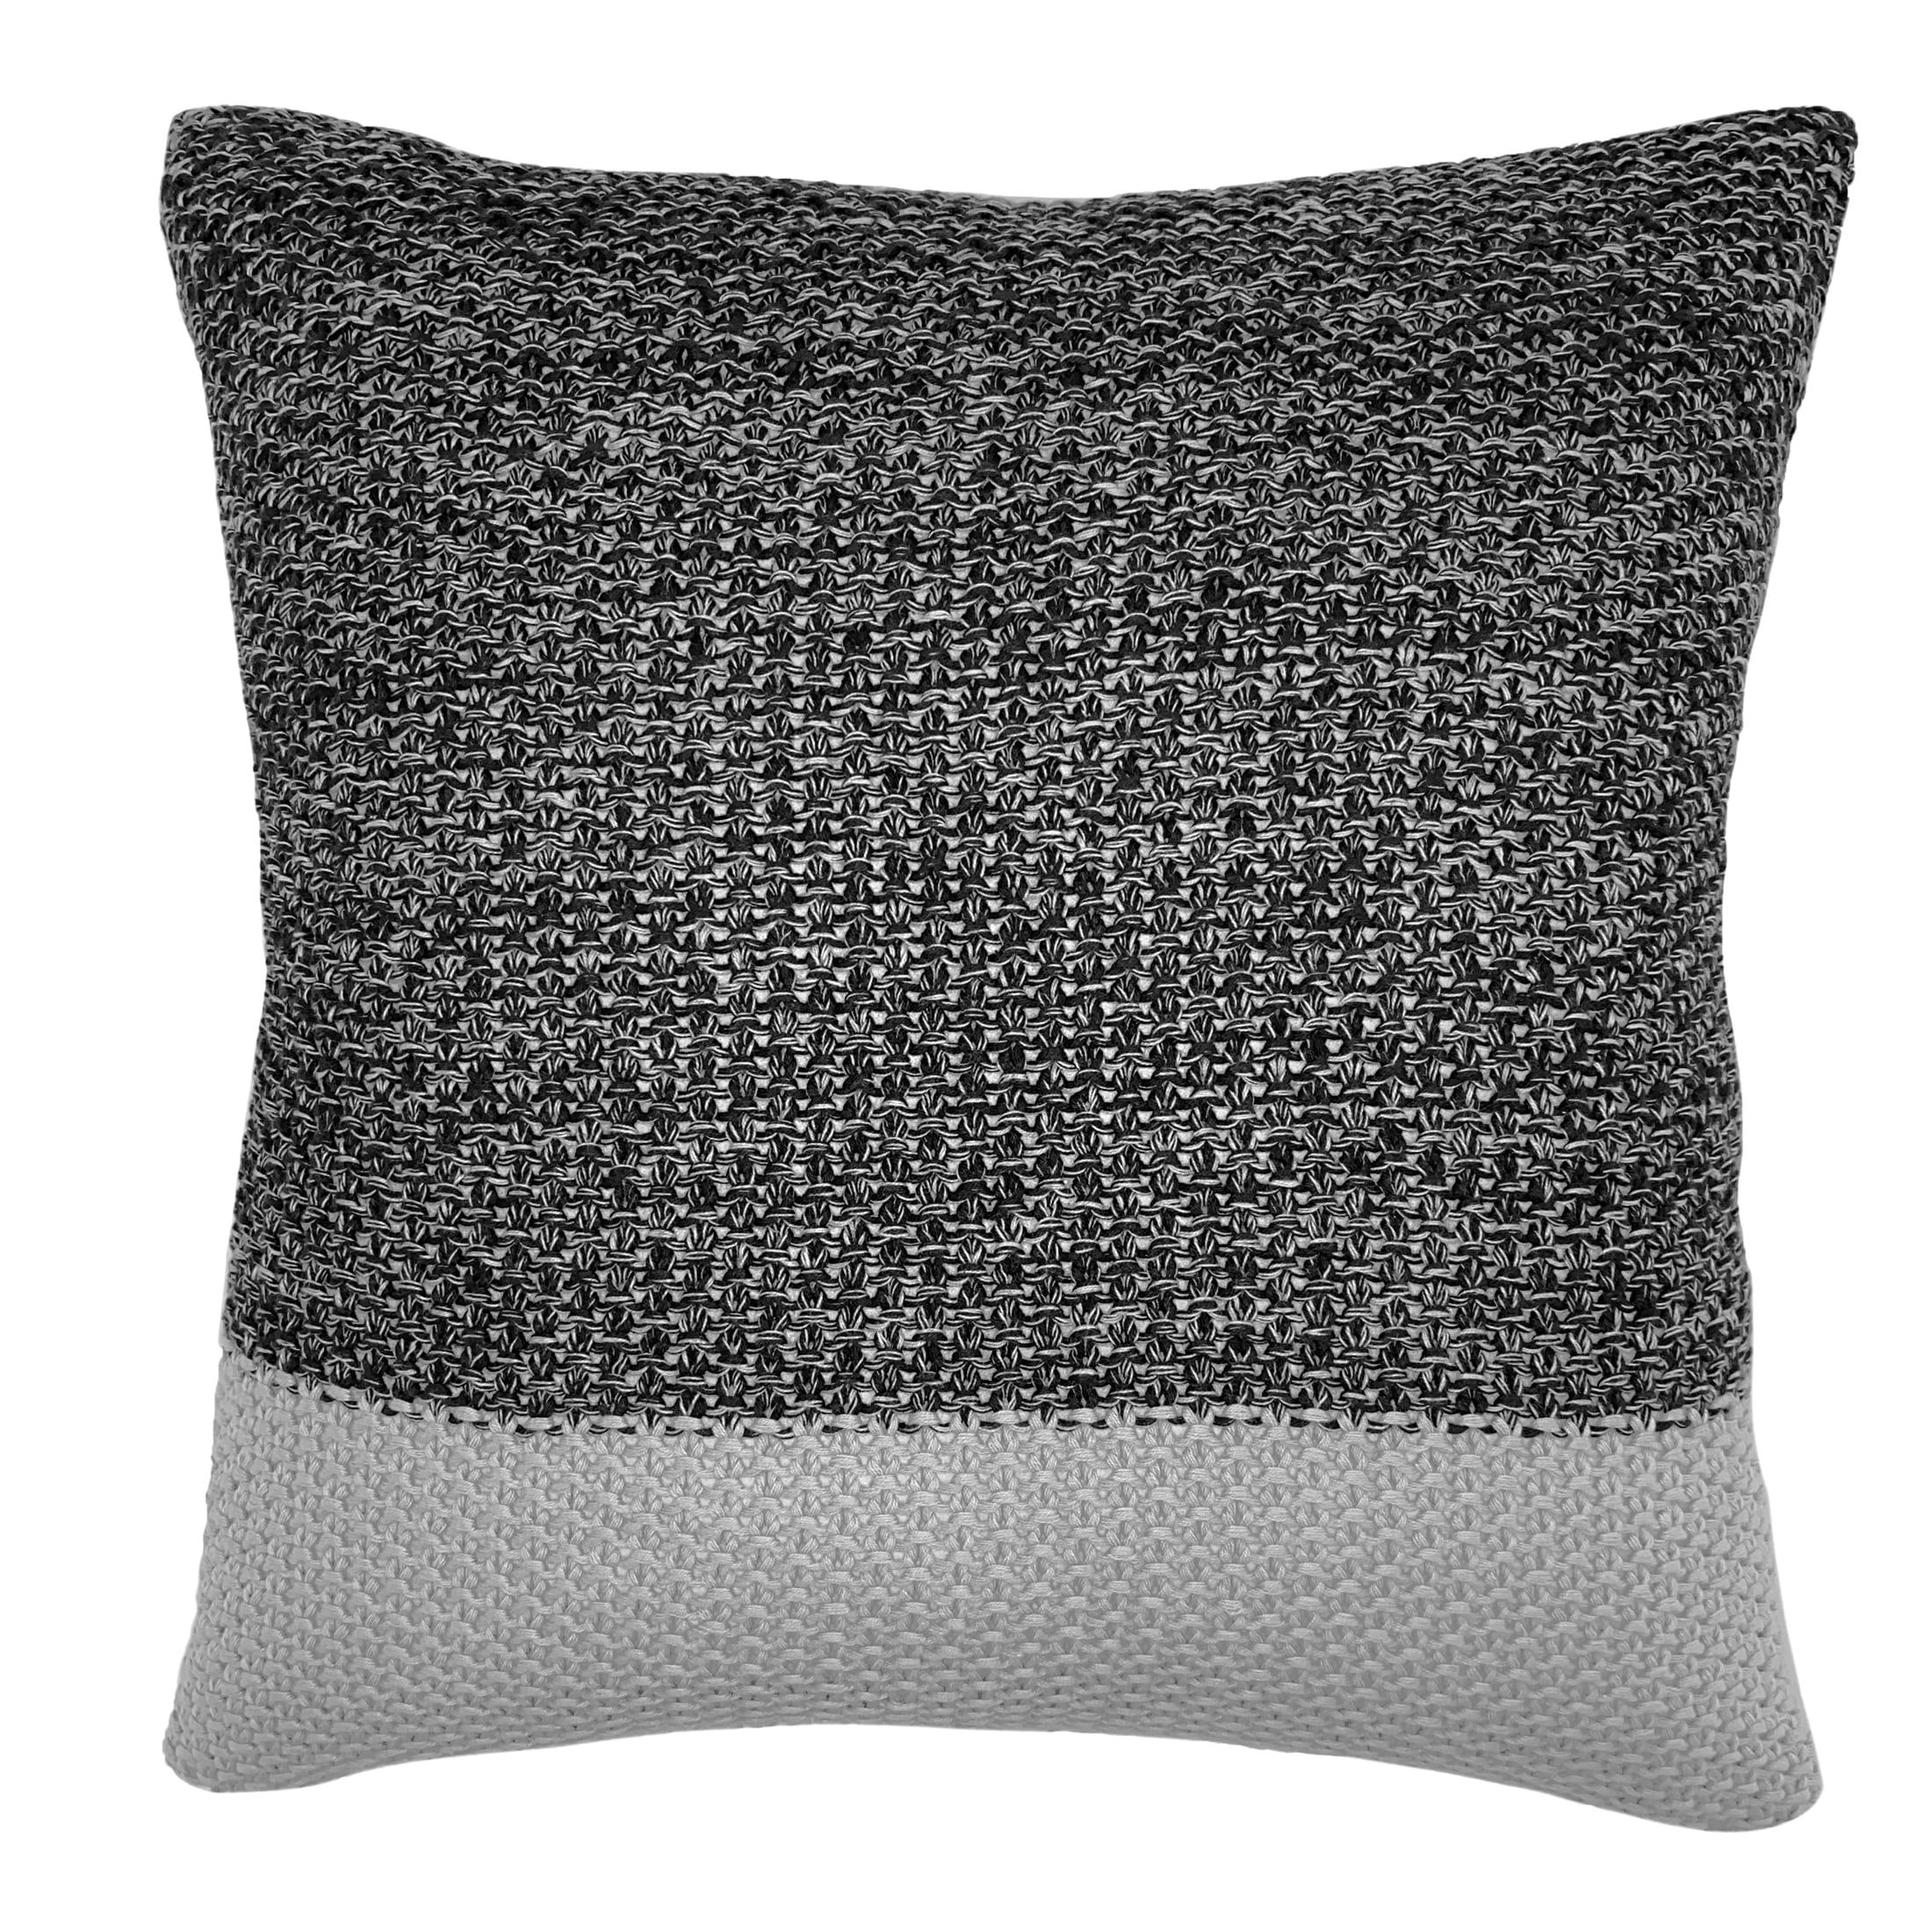 My Texas House Cassia Sweater Knit Square Decorative Pillow Cover, 18" x 18", Black | Walmart (US)